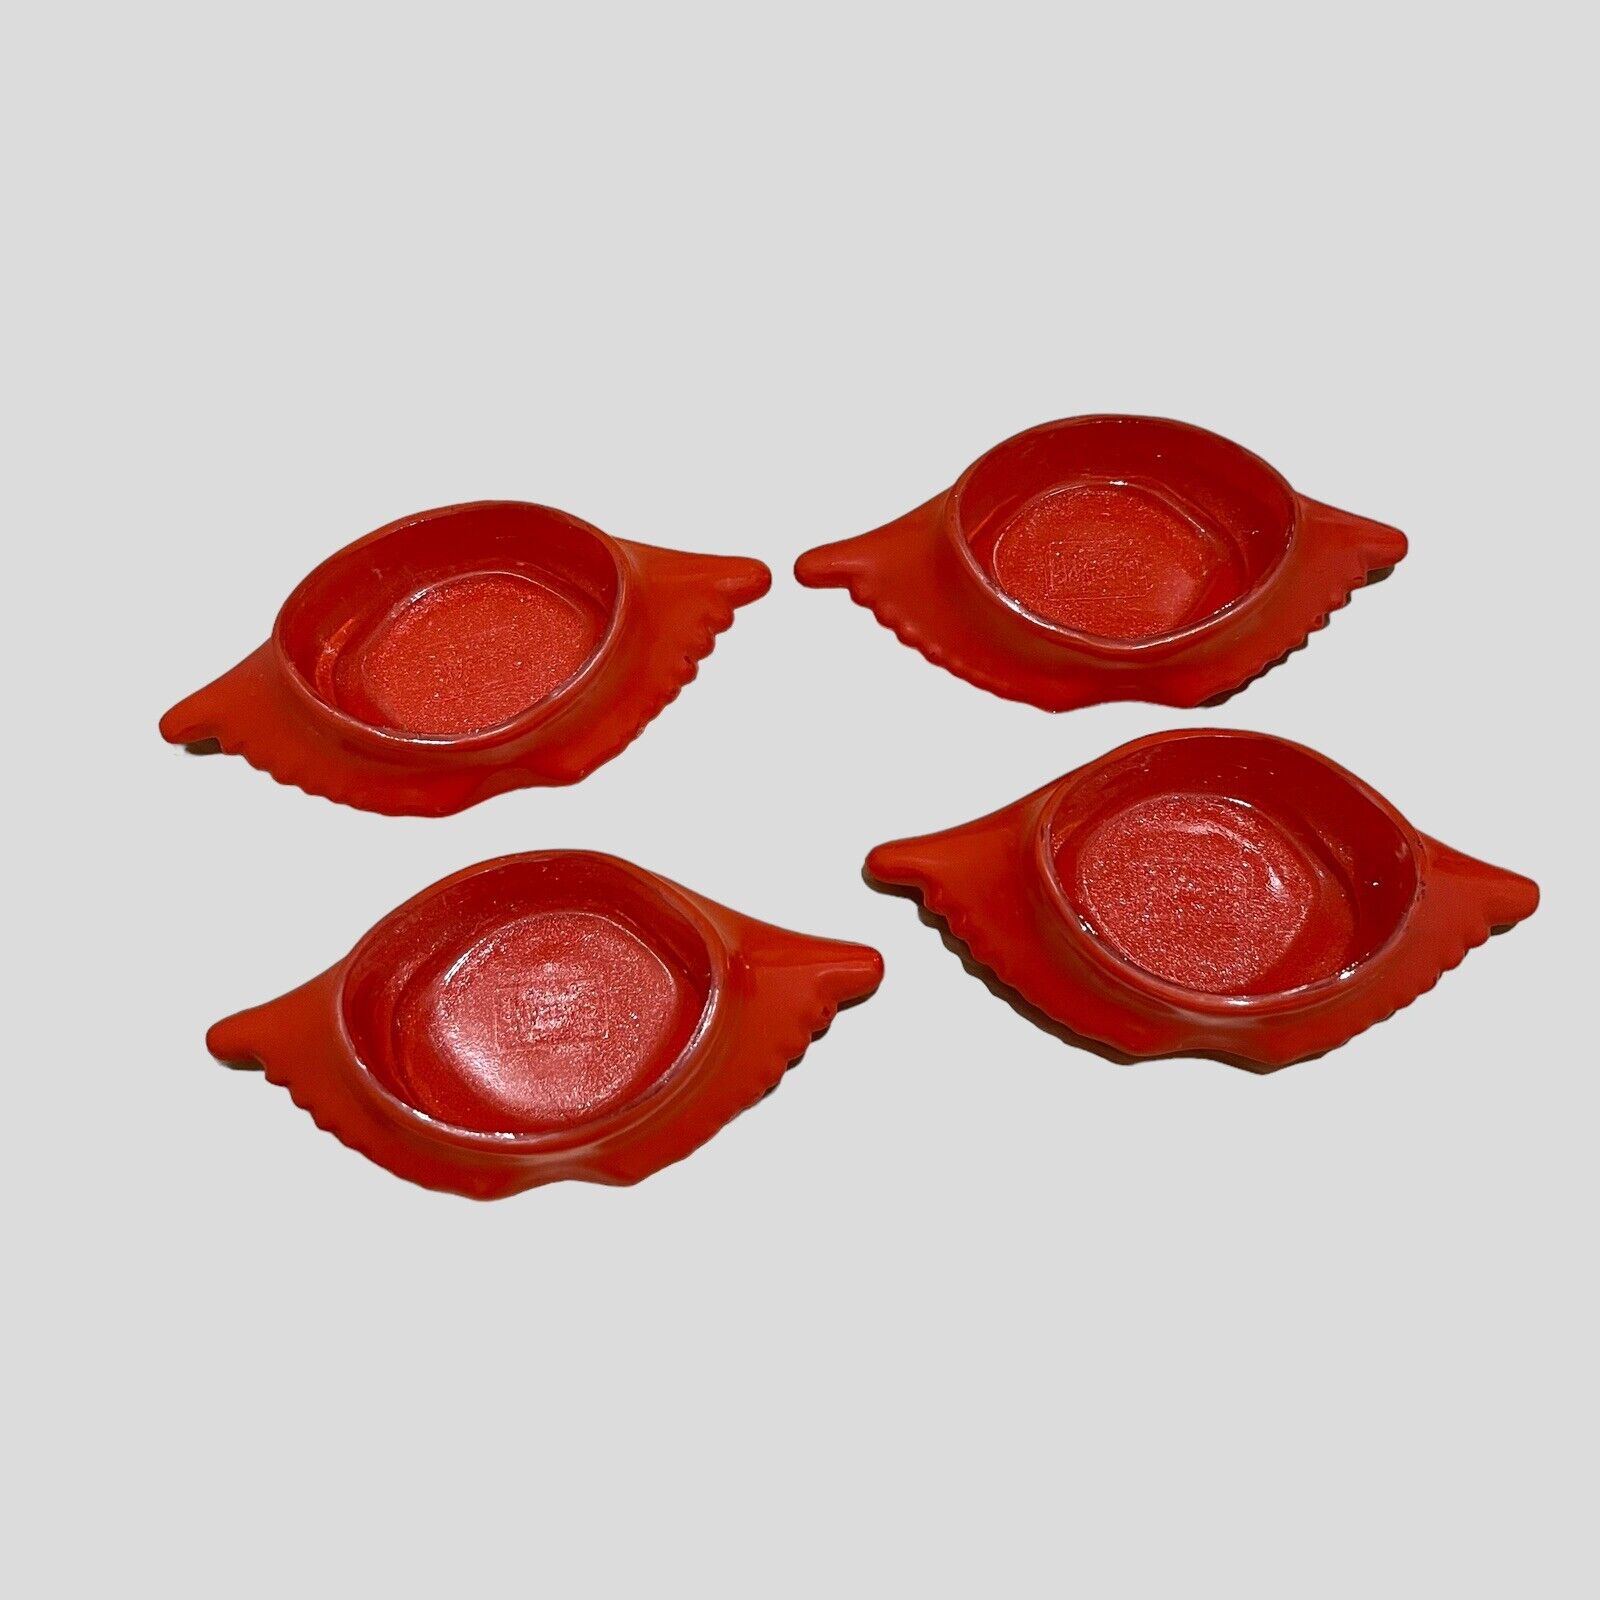 Vintage Red McKee Glasbake Deviled Crab Imperial Baking Shell Dishes Set Of 4